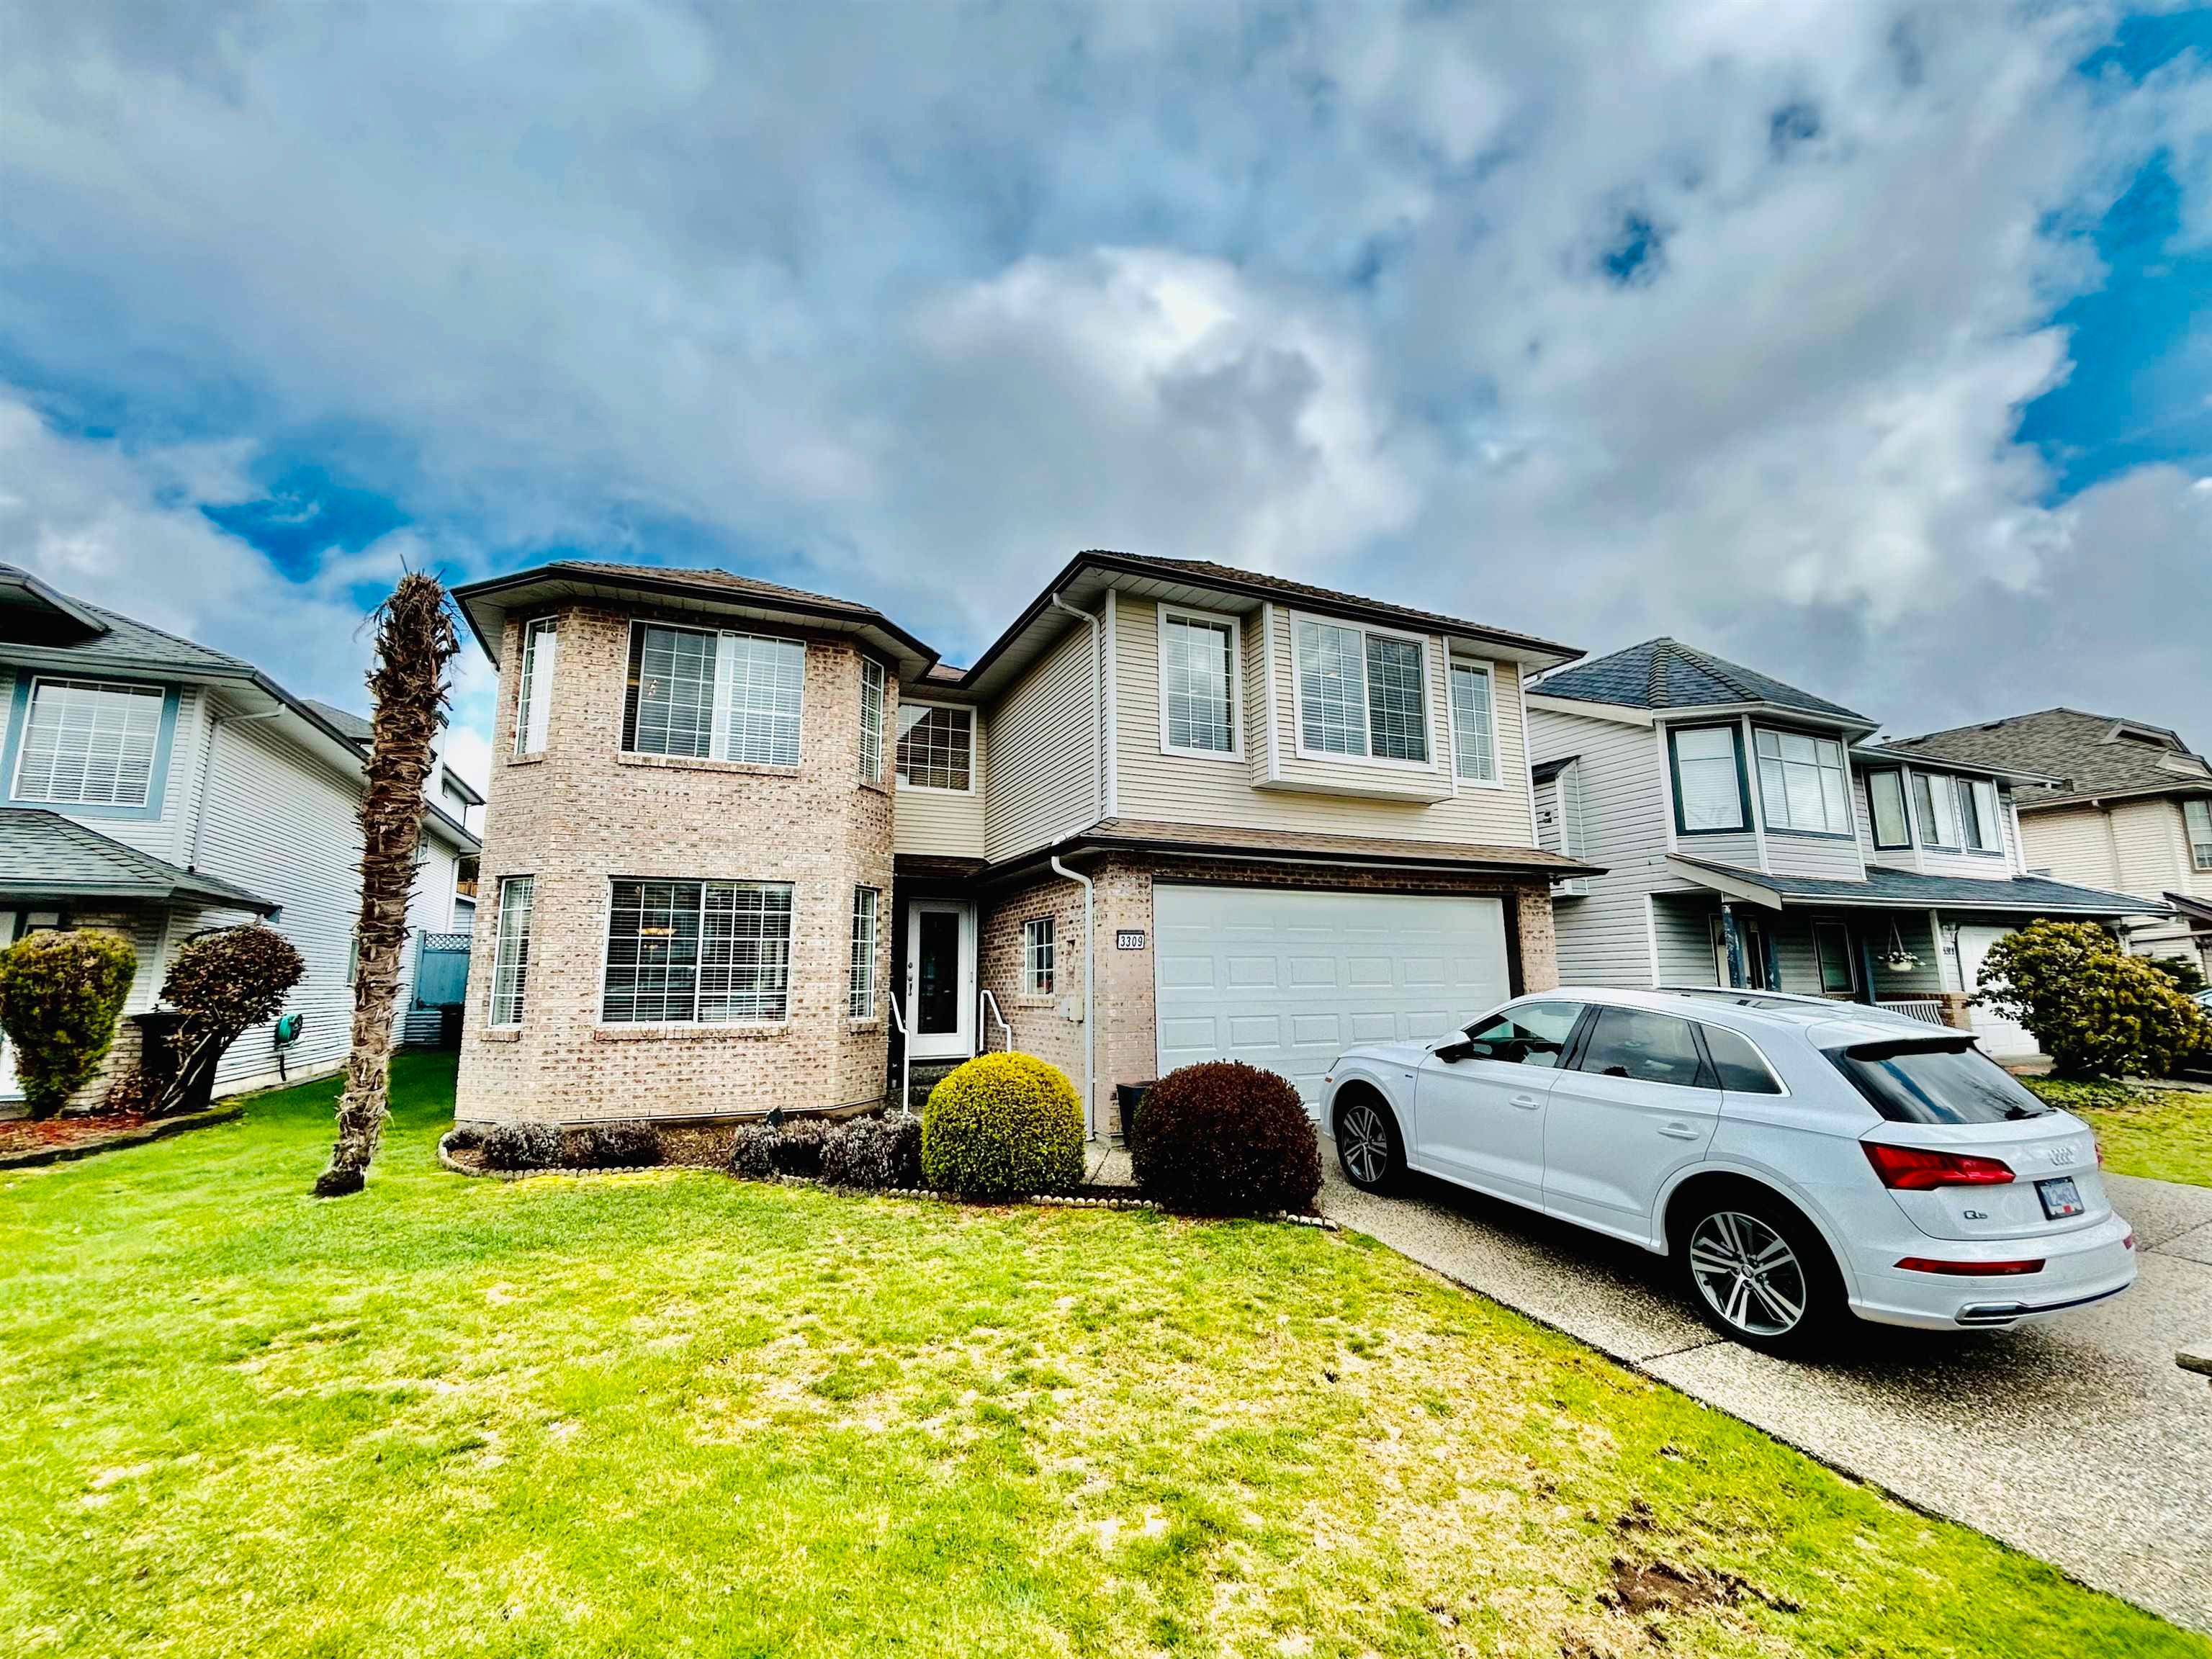 New property listed in Park Ridge Estates, Coquitlam